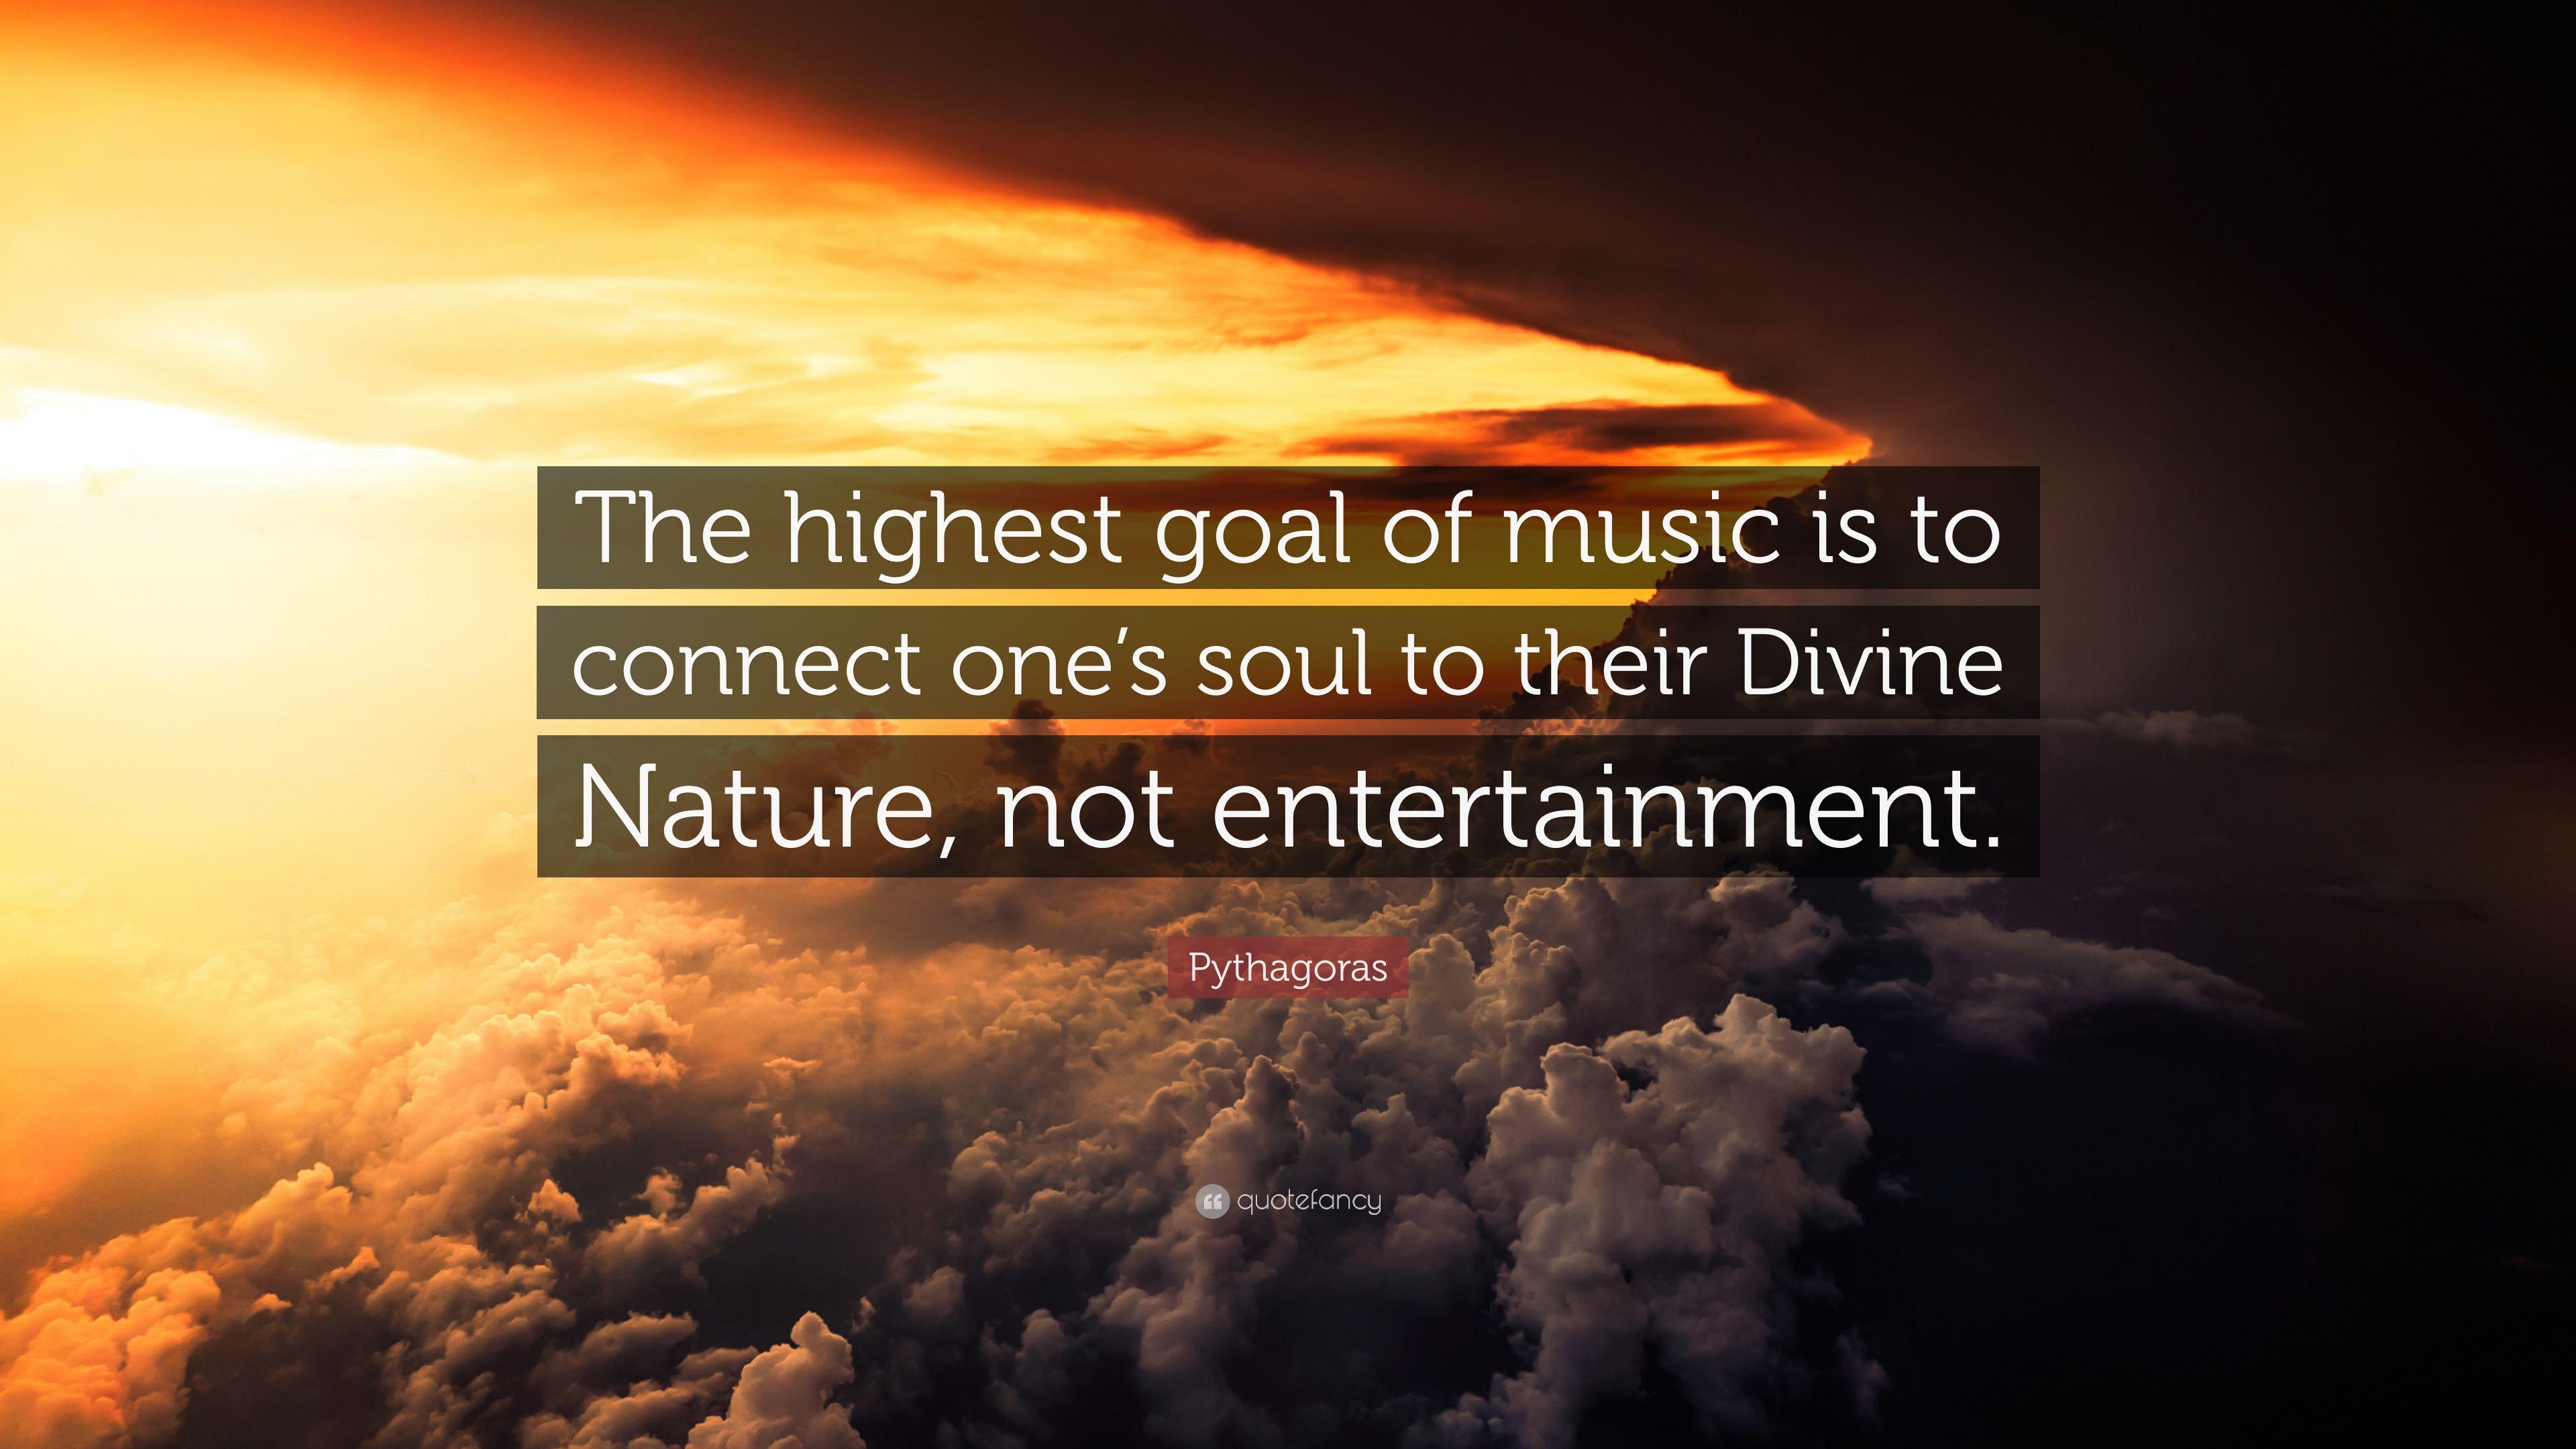 Pythagoras Quote: “The highest goal of music is to connect one's